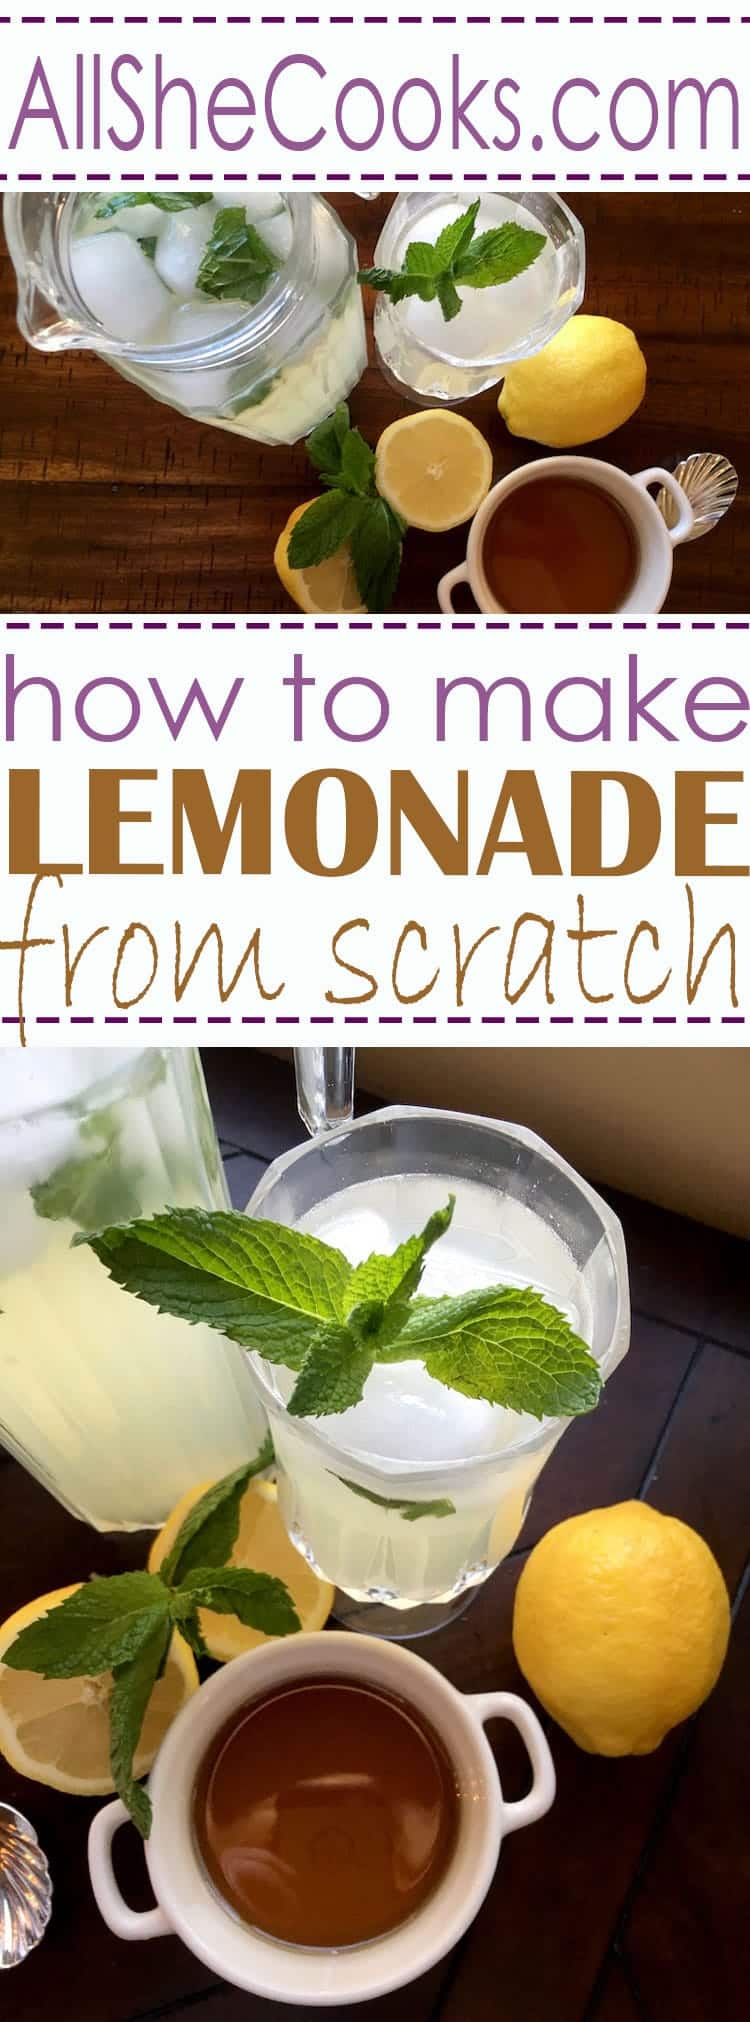 Learn how to make lemonade from scratch with this easy do it at home recipe.